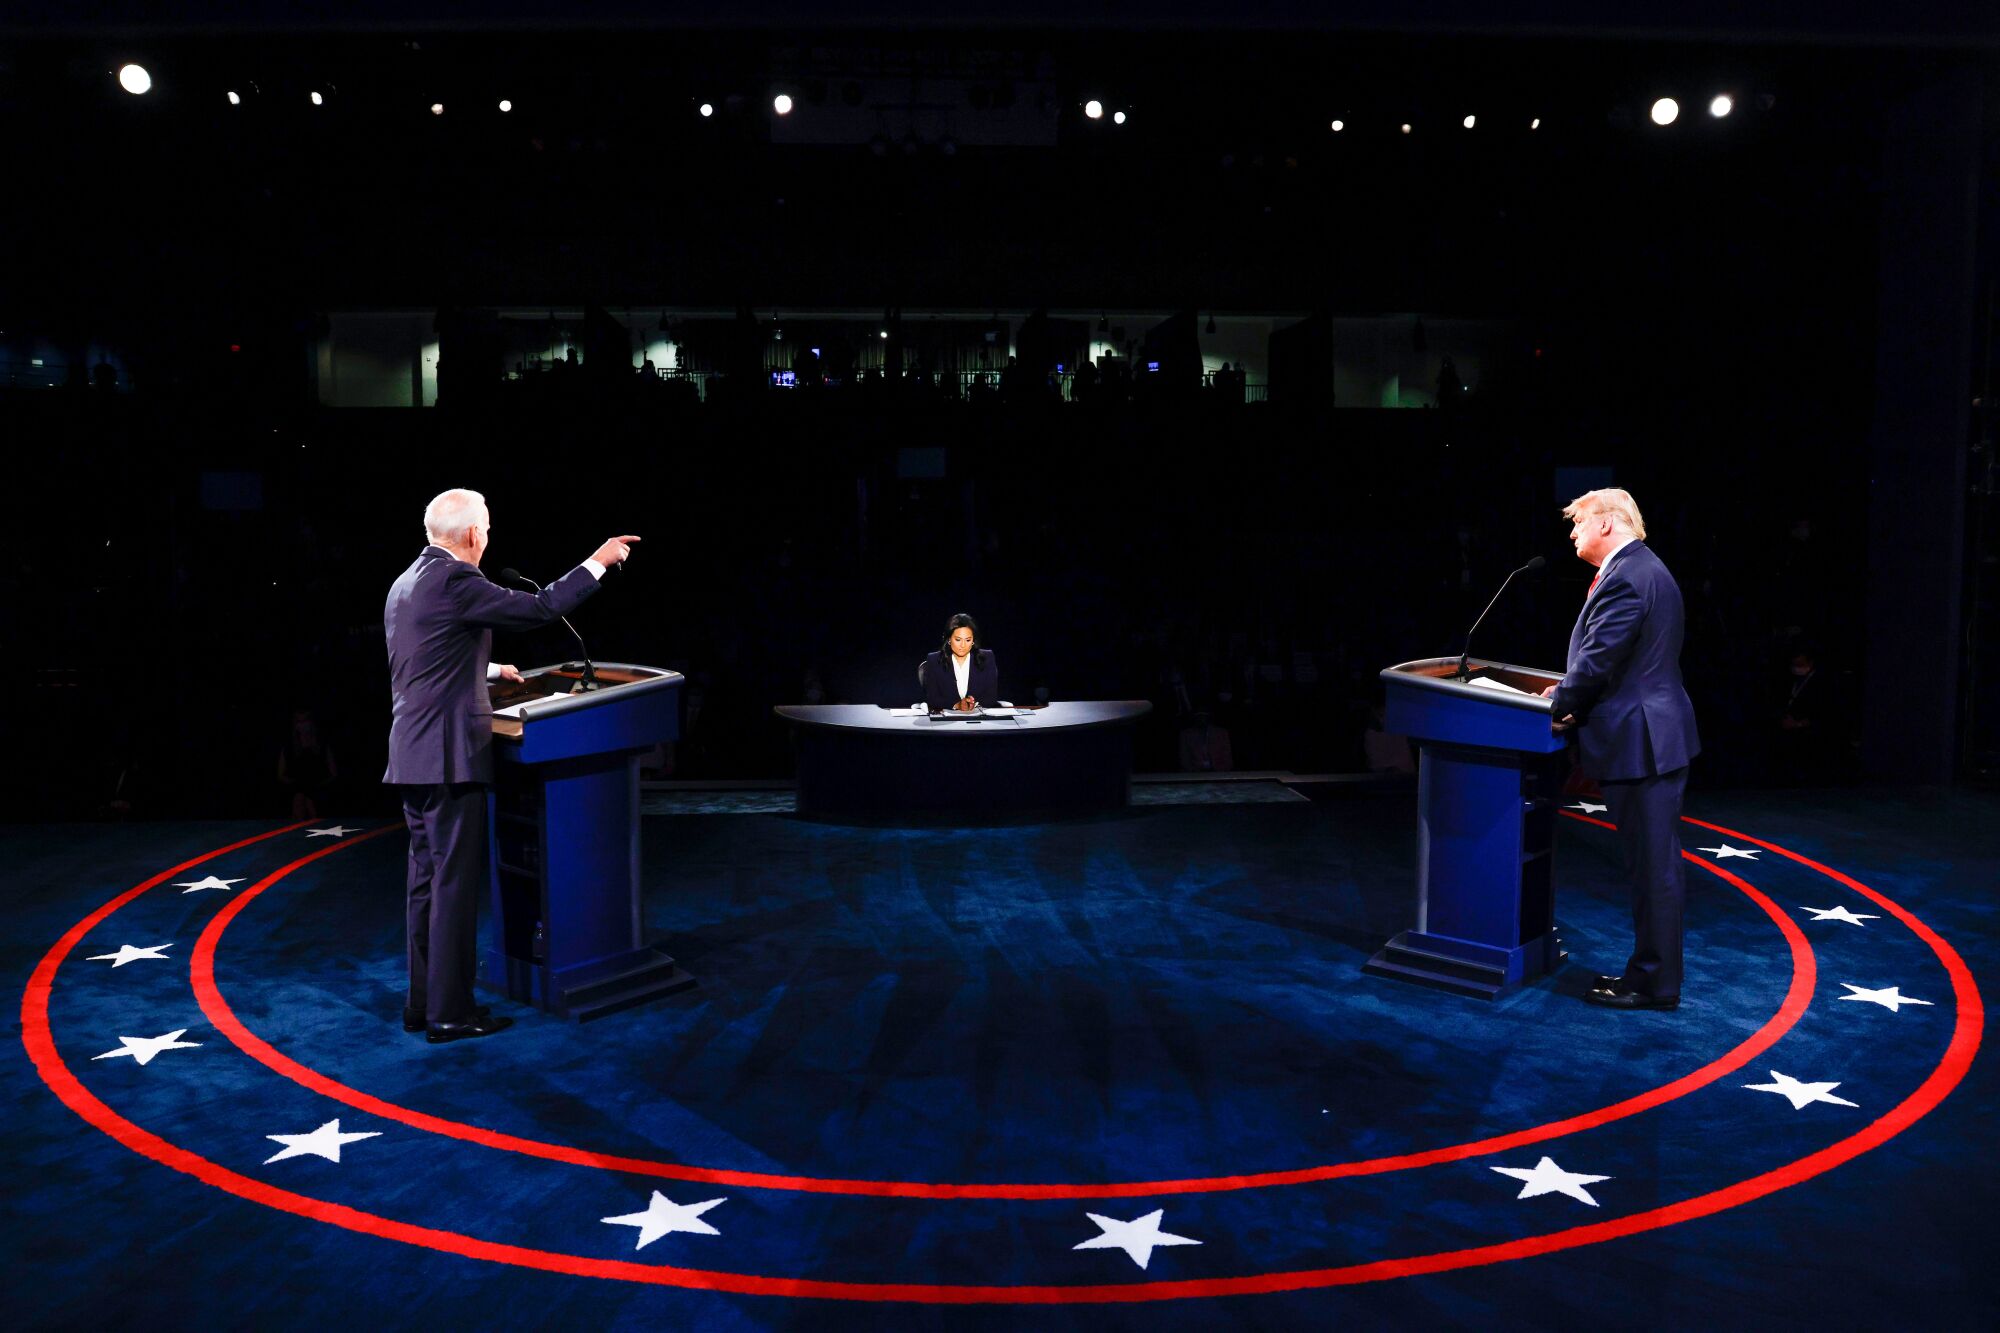 President Trump and Joe Biden stand at their lecterns on a blue-carpeted debate stage with the moderator seen between them